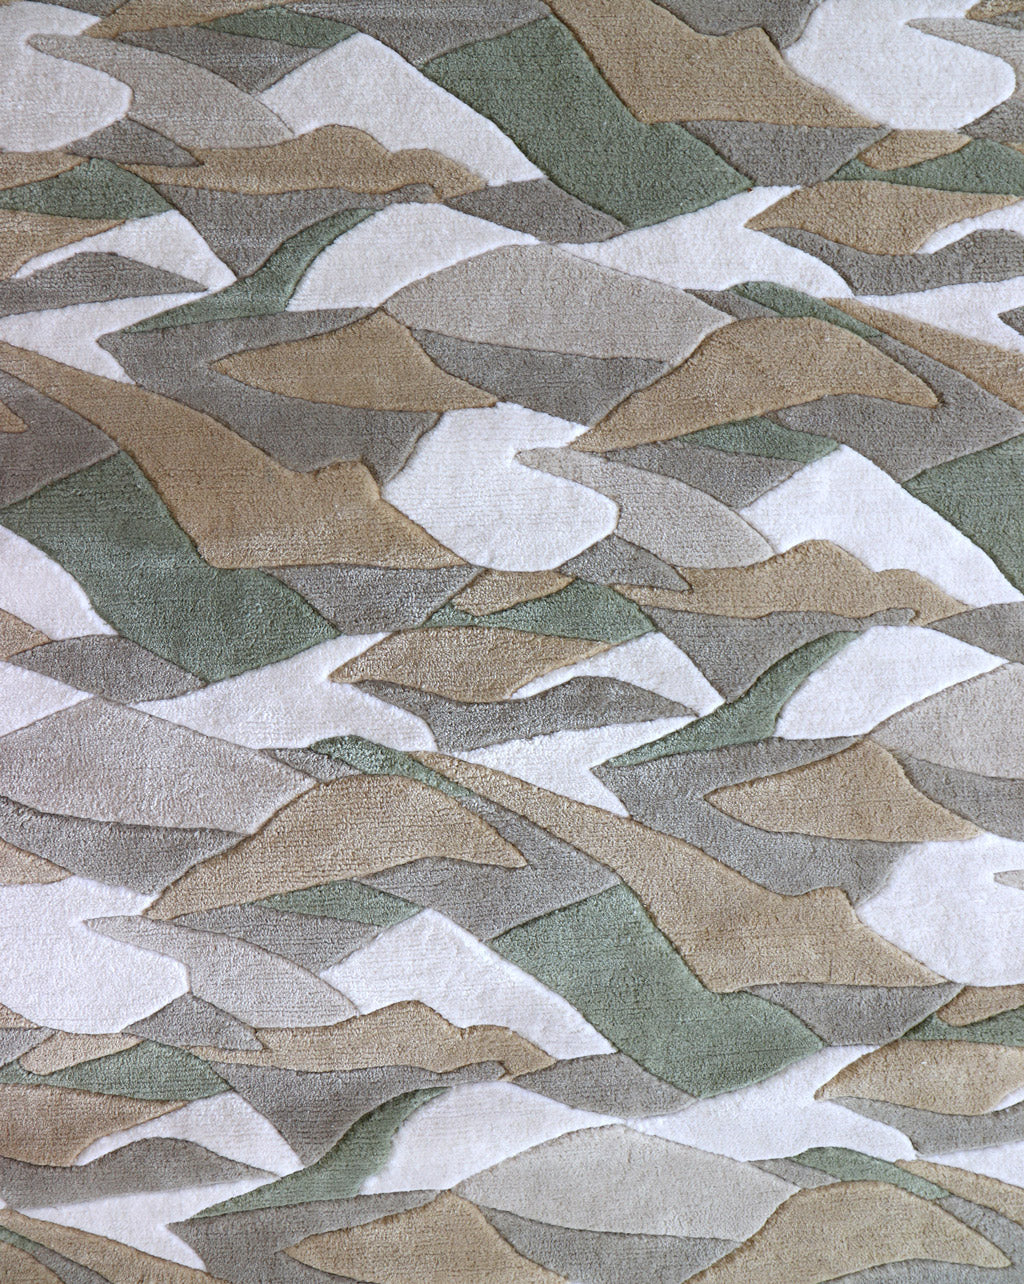 A sumptuous merino wool Mani Hand Knotted Rug 5' x8' Earth with a camouflage pattern and hand-cut bevels on the fabric